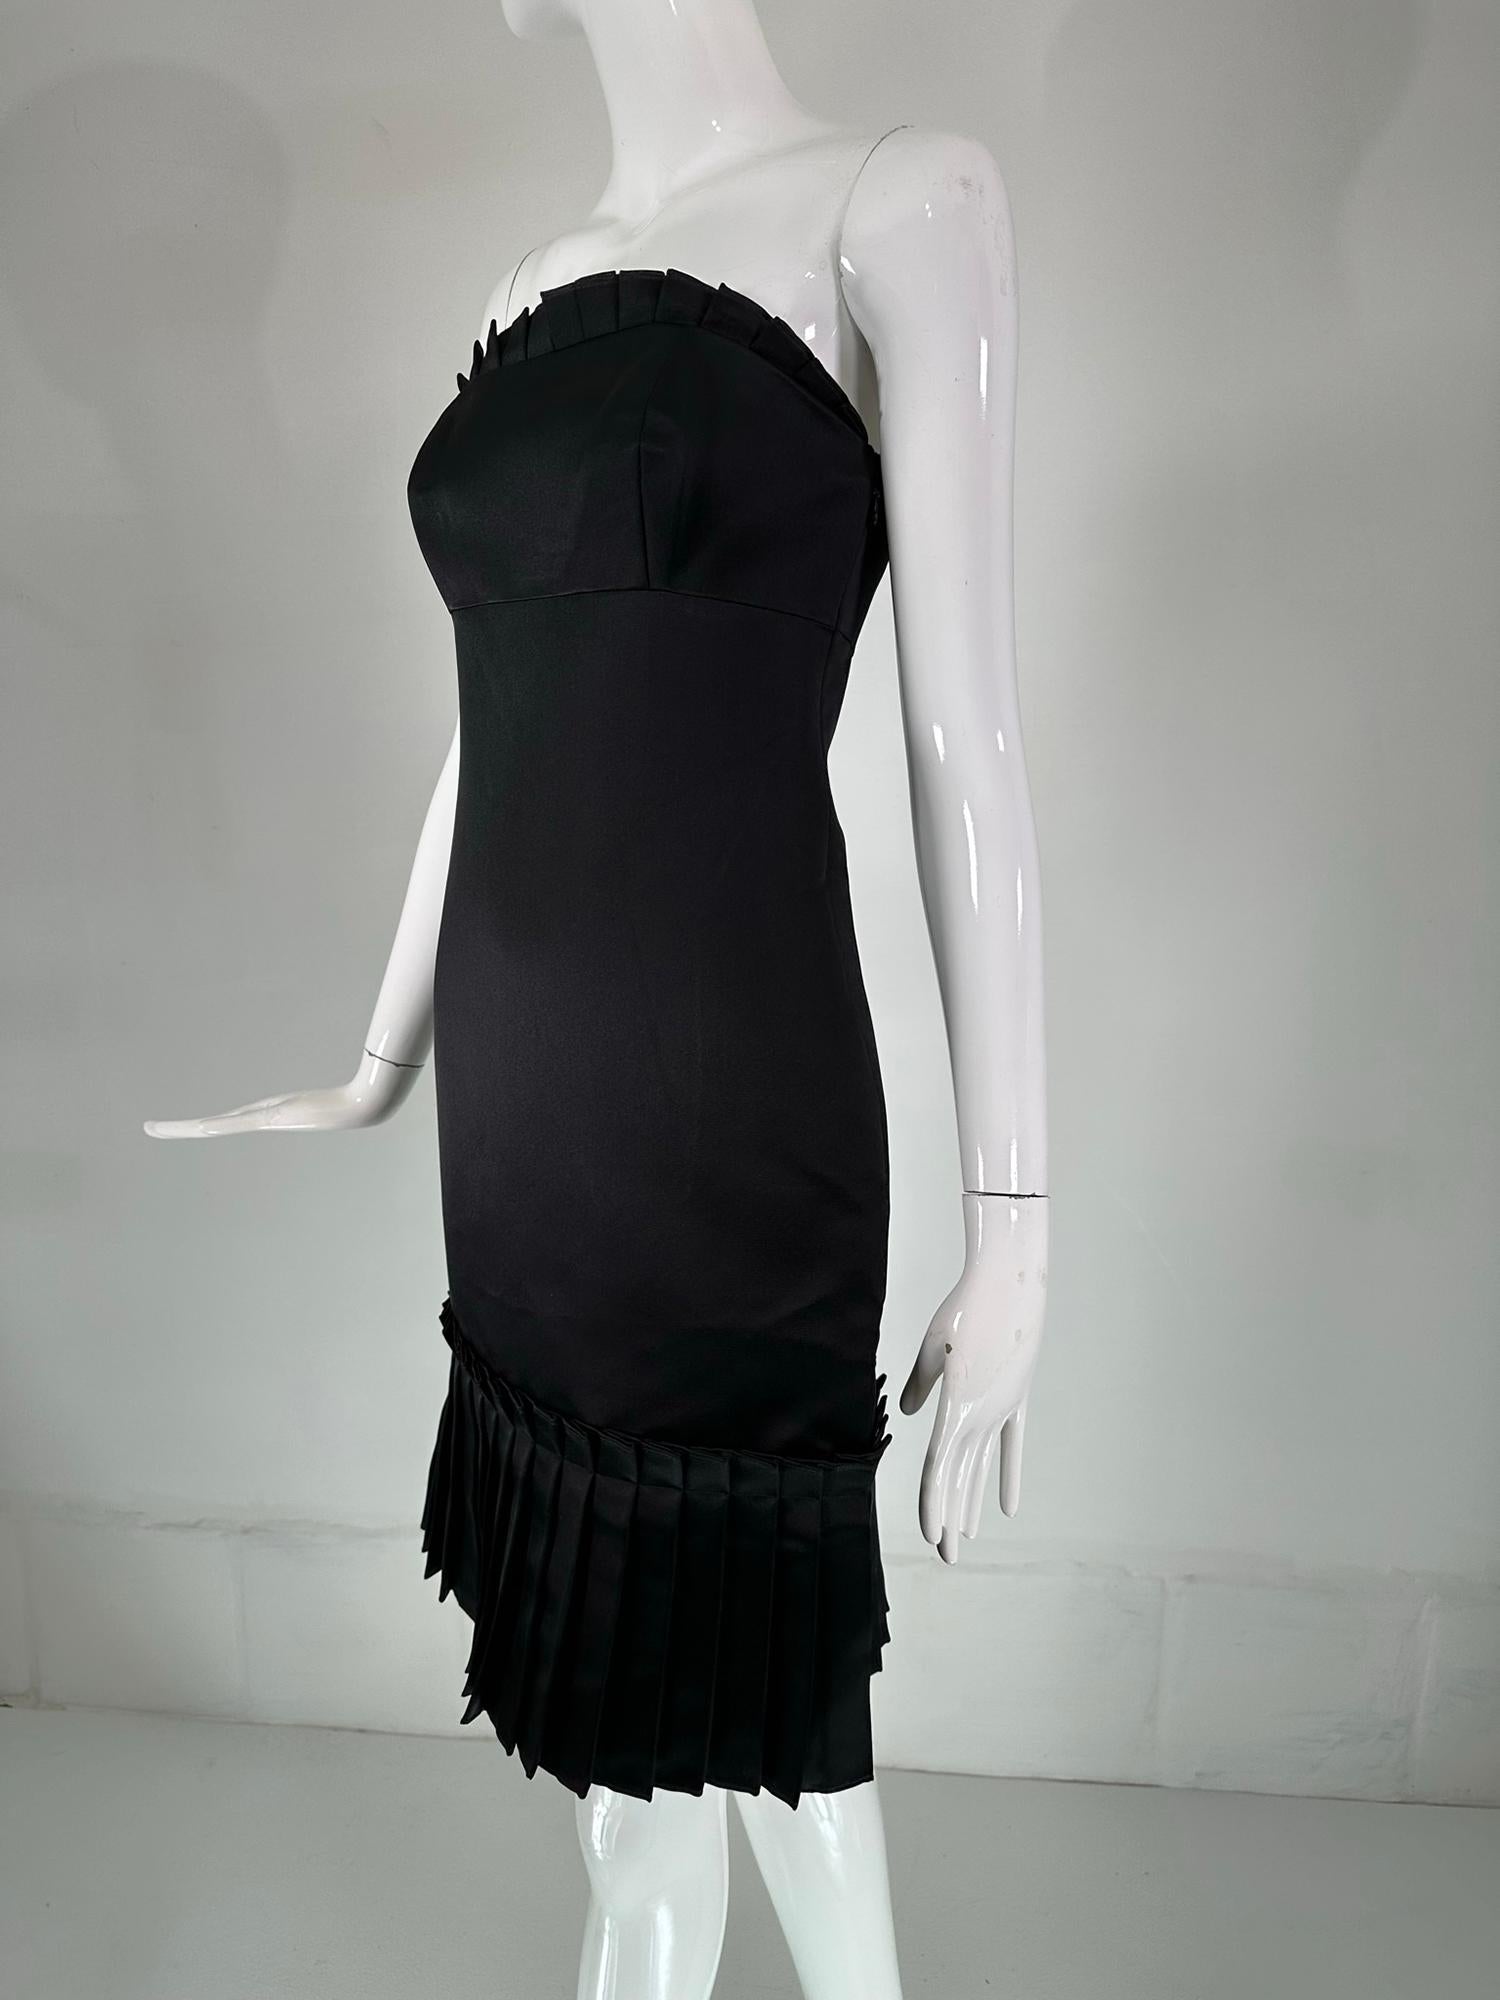 Bill Blass Black Silk Satin Strapless Cocktail Dress with Tailored Ruffles 2 In Good Condition For Sale In West Palm Beach, FL